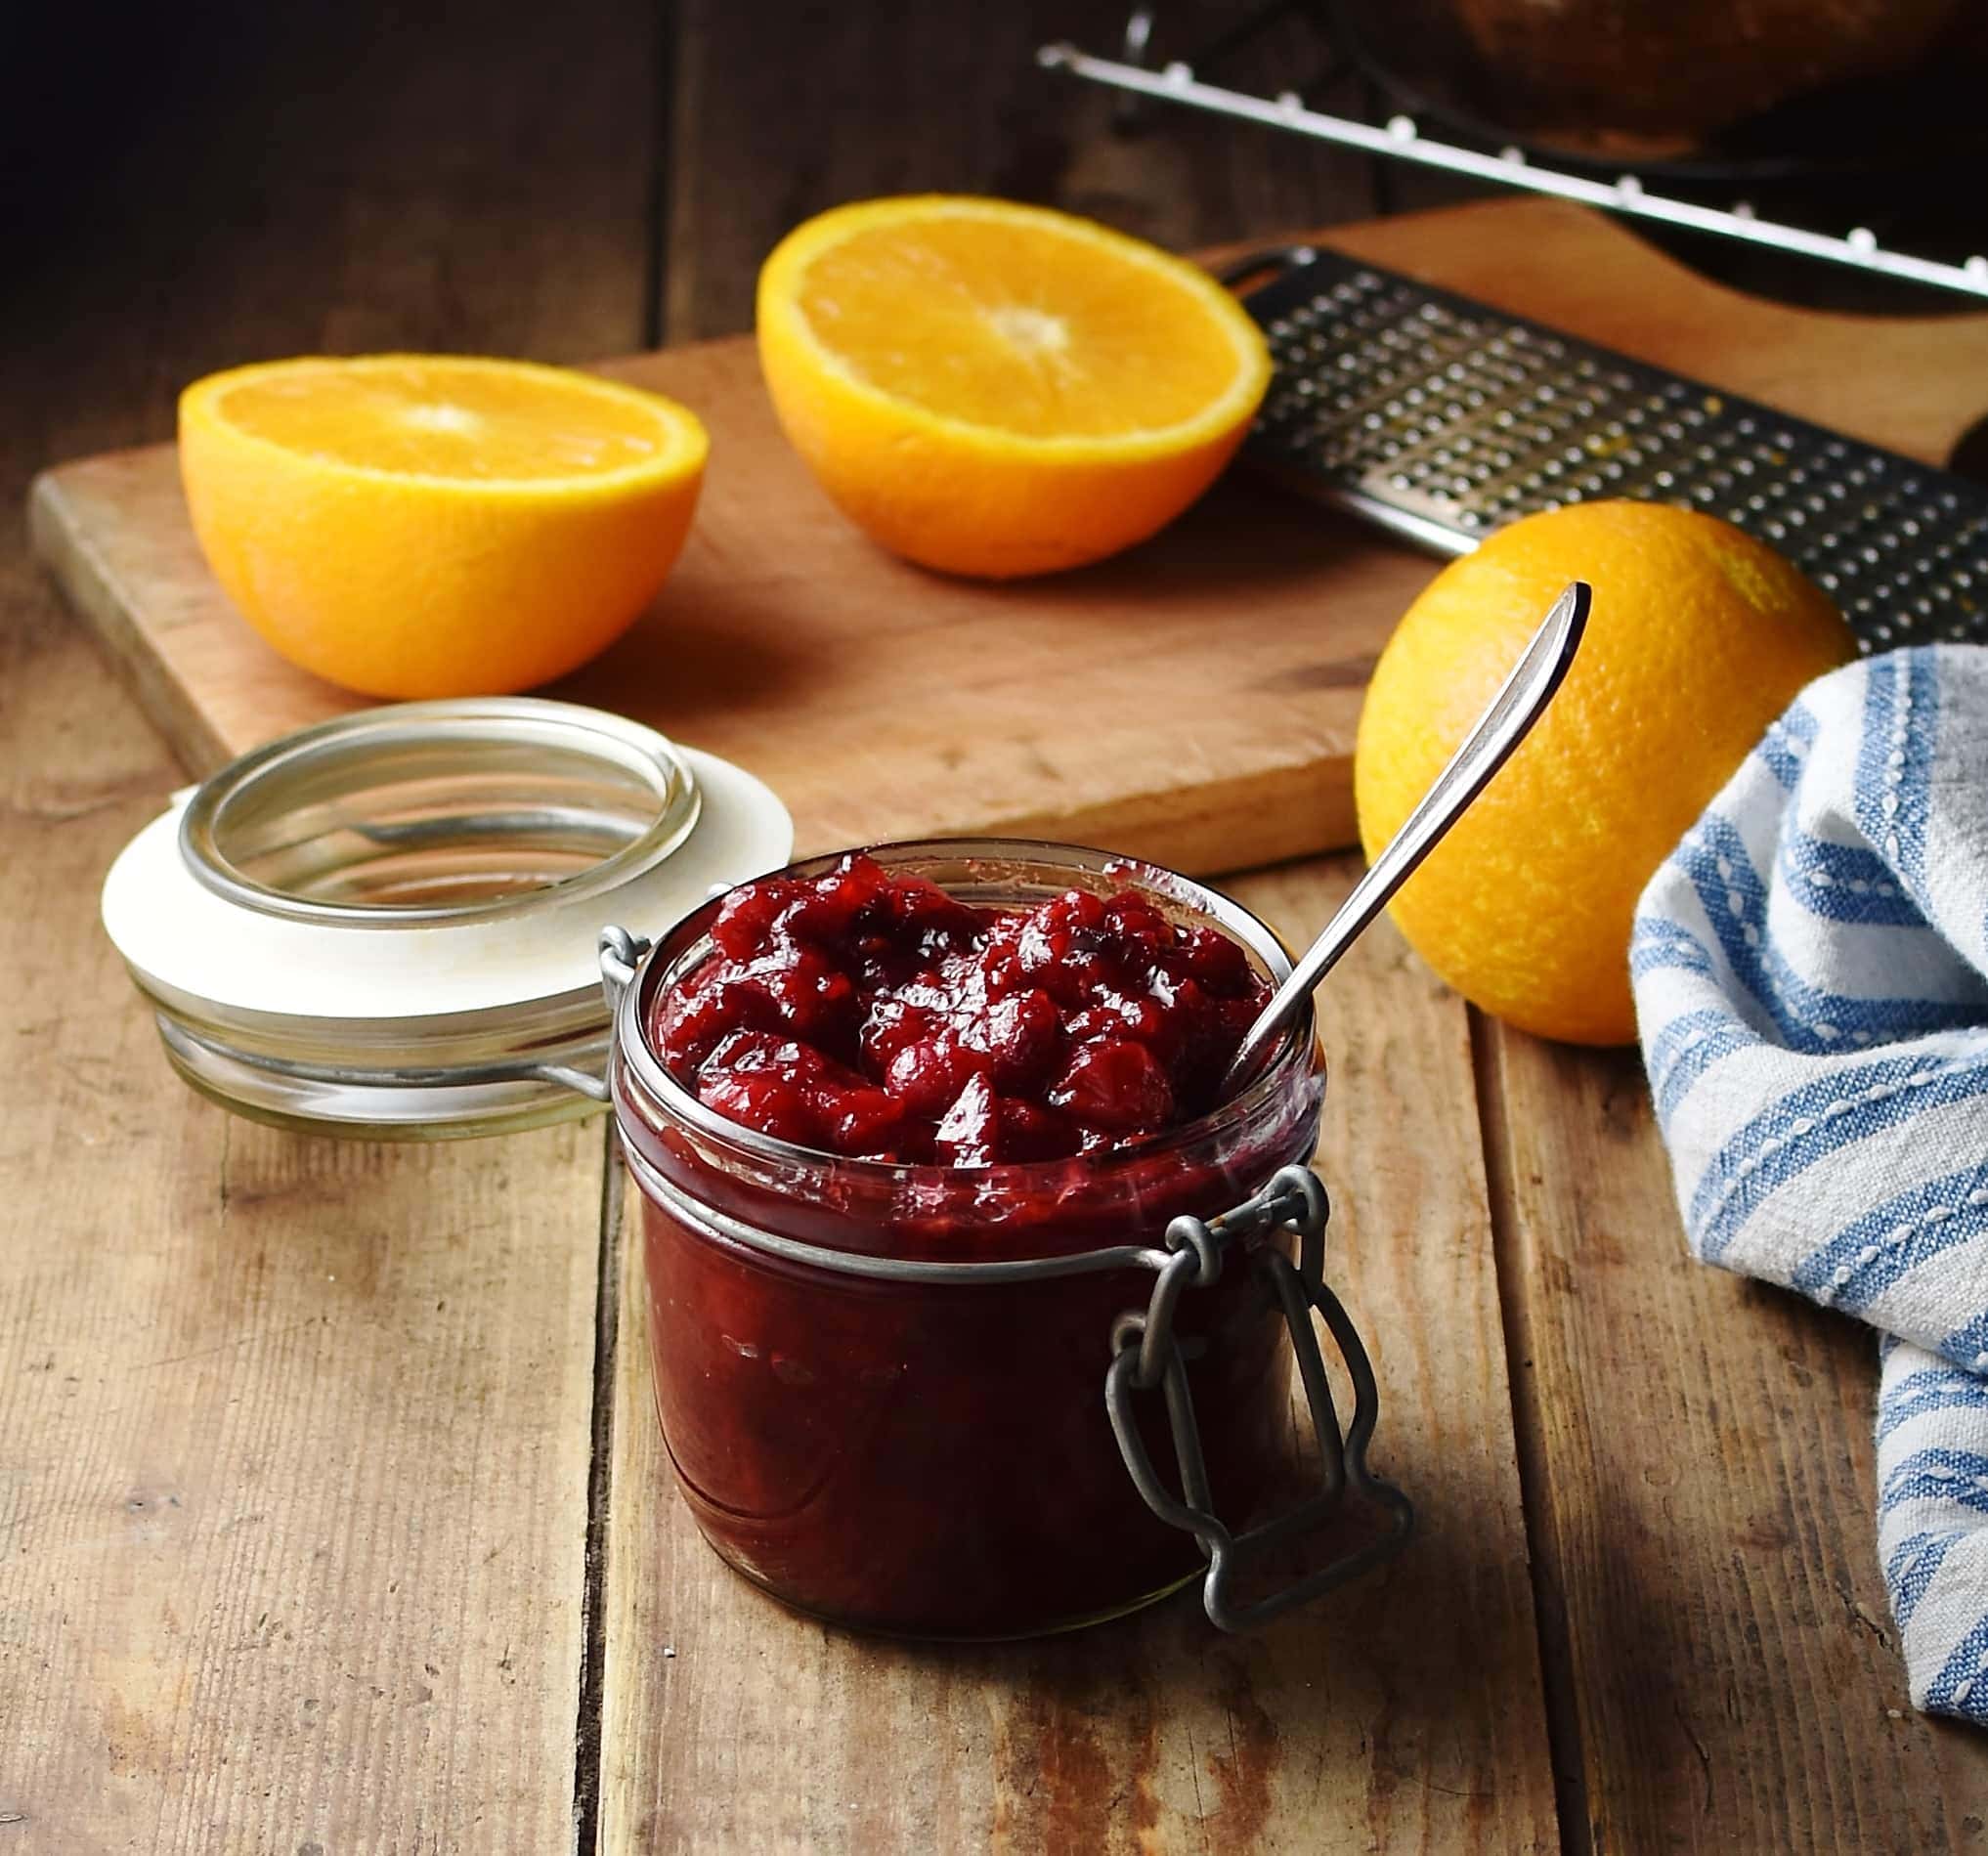 Side view of cranberry sauce in jar with spoon, oranges and fruit zester in background.